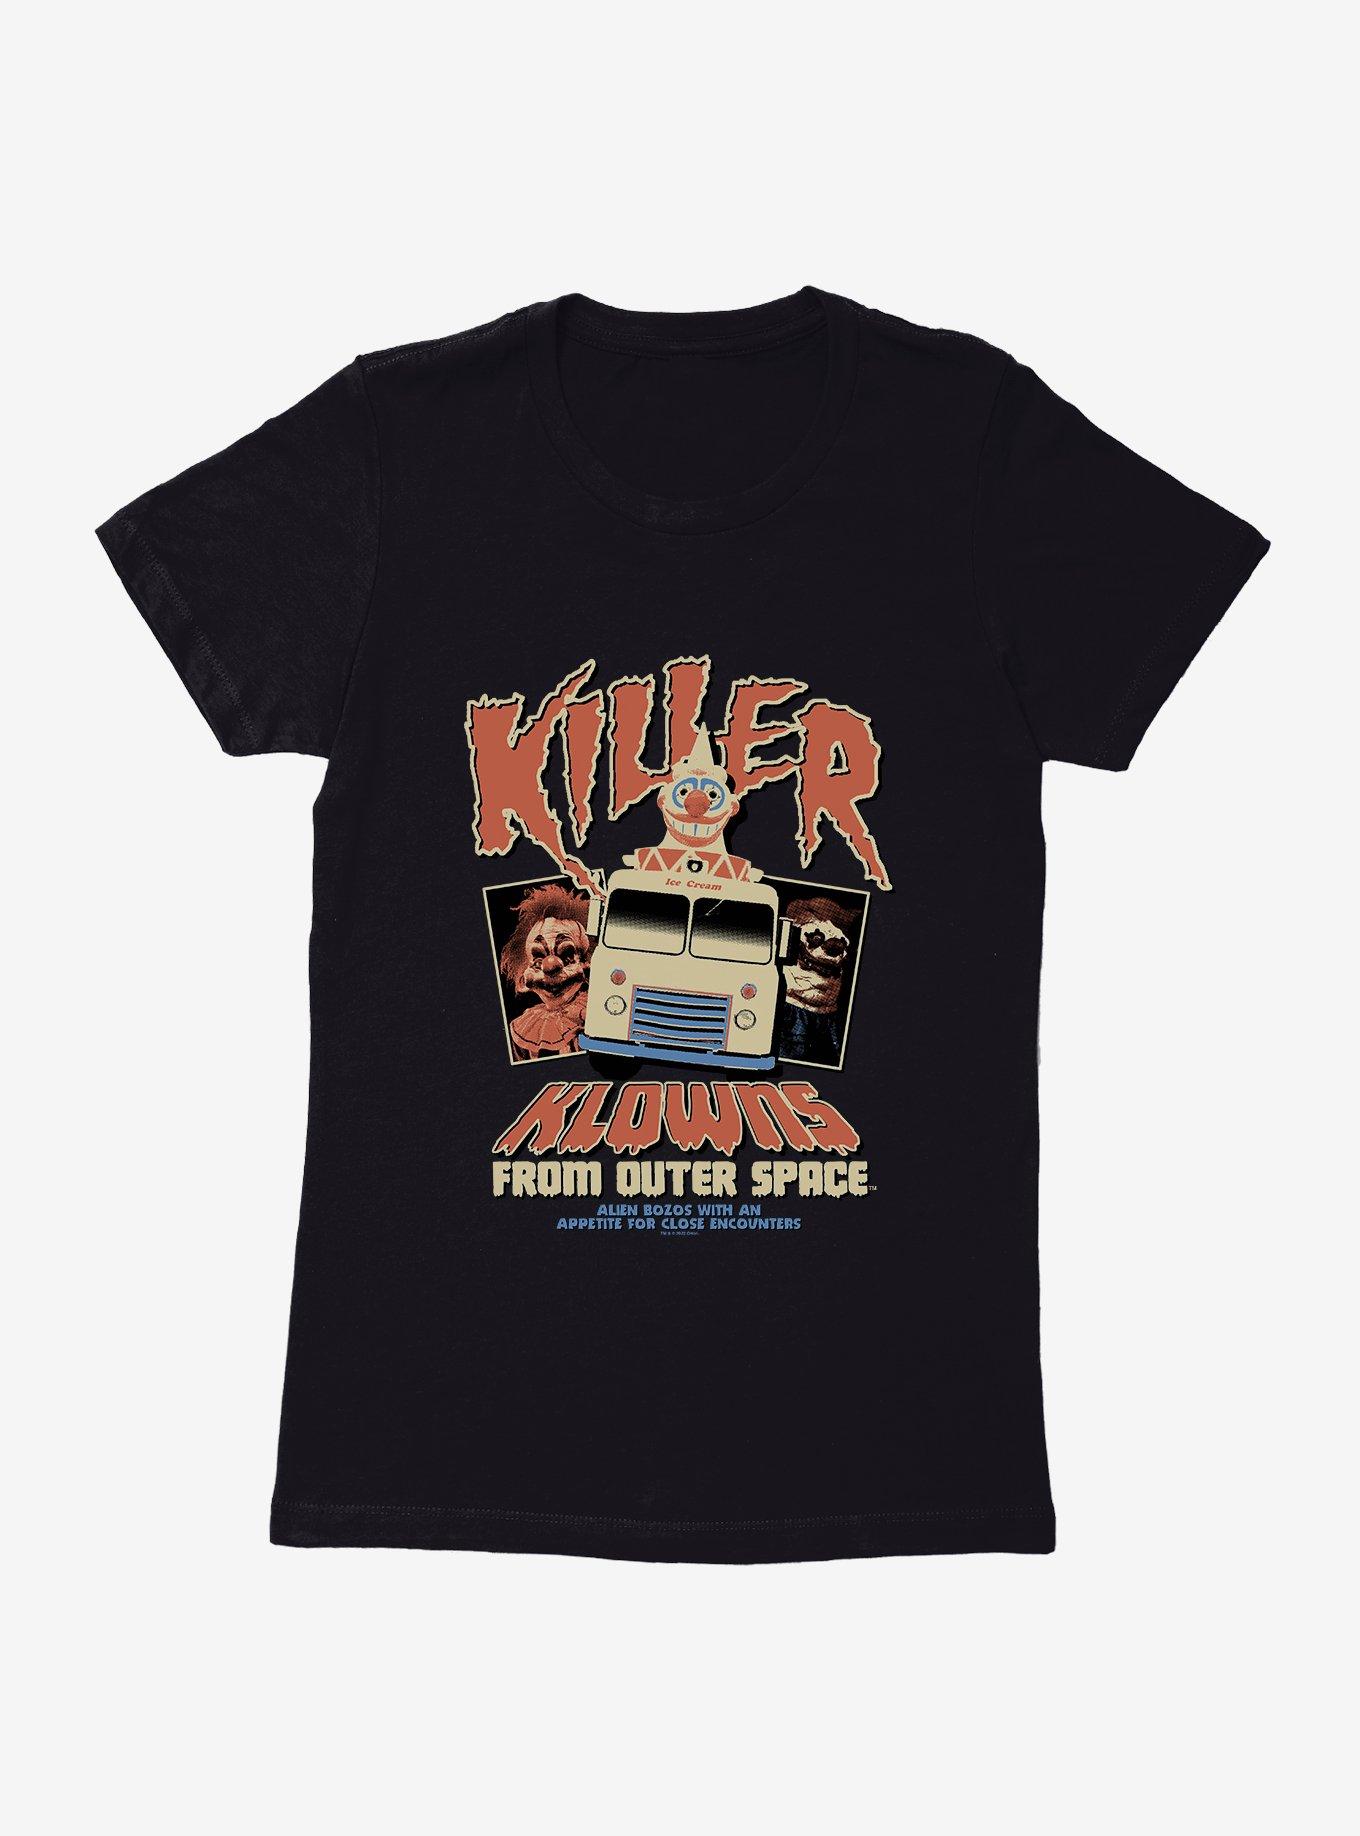 Killer Klowns From Outer Space Vintage Movie Poster Womens T-Shirt, , hi-res